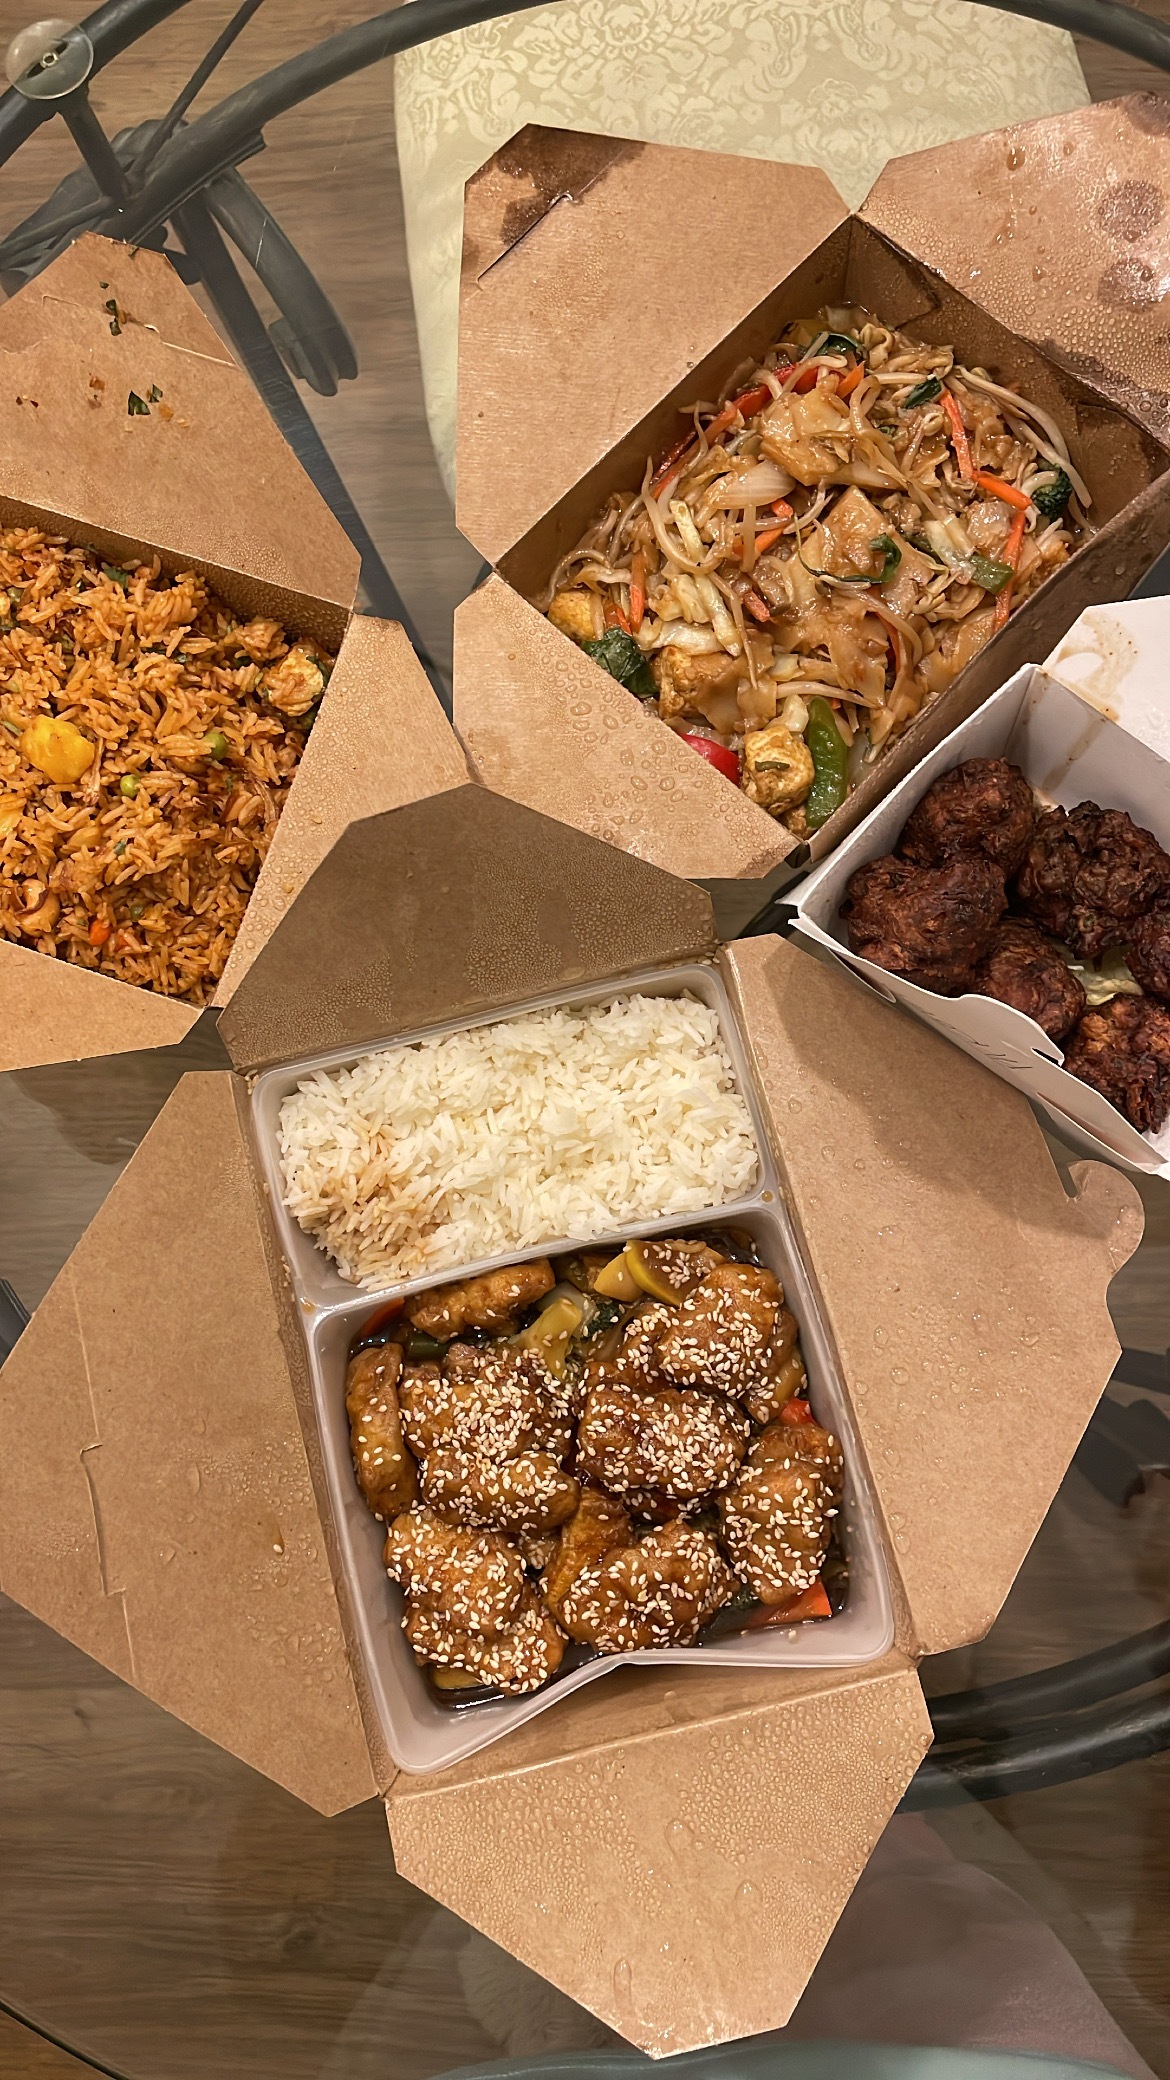  Sesame Chicken, Pineapple Fried Rice with Tofu, Drunken Noodles and Vegetable Pakoras